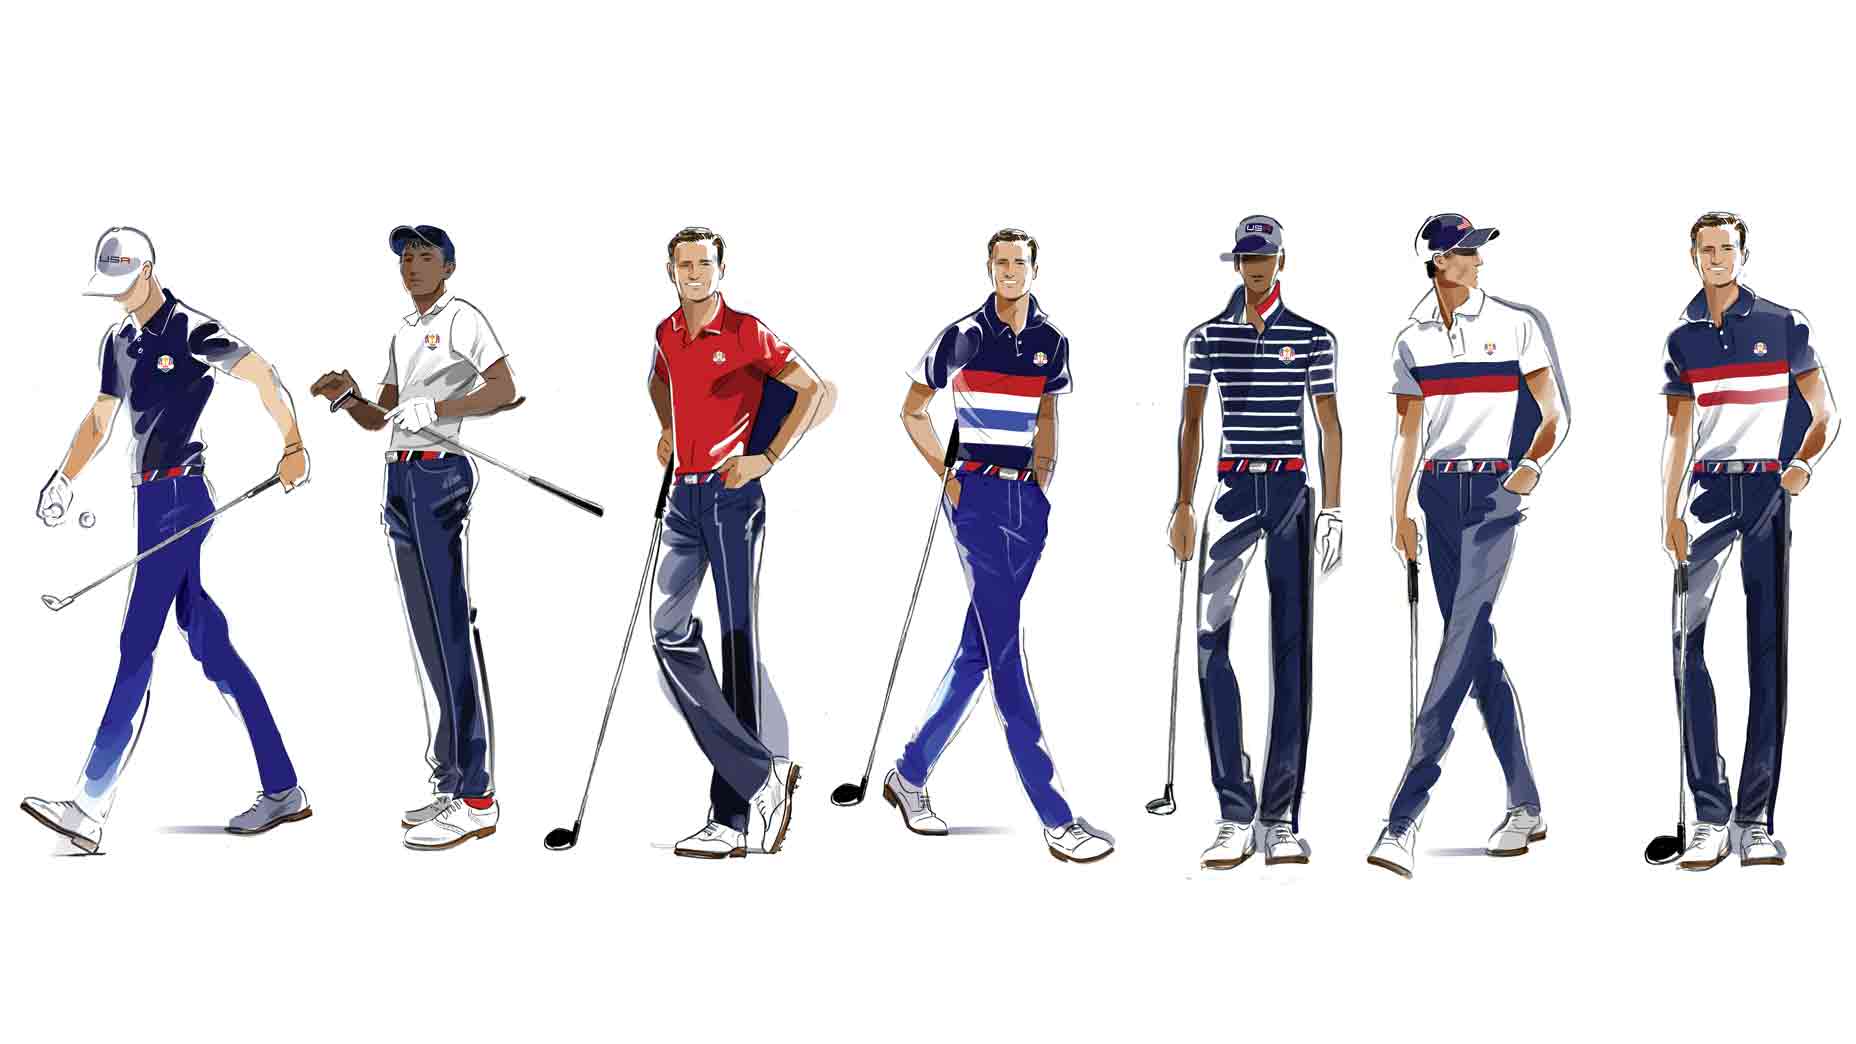 Check out the US Ryder Cup team uniforms, courtesy of Ralph Lauren